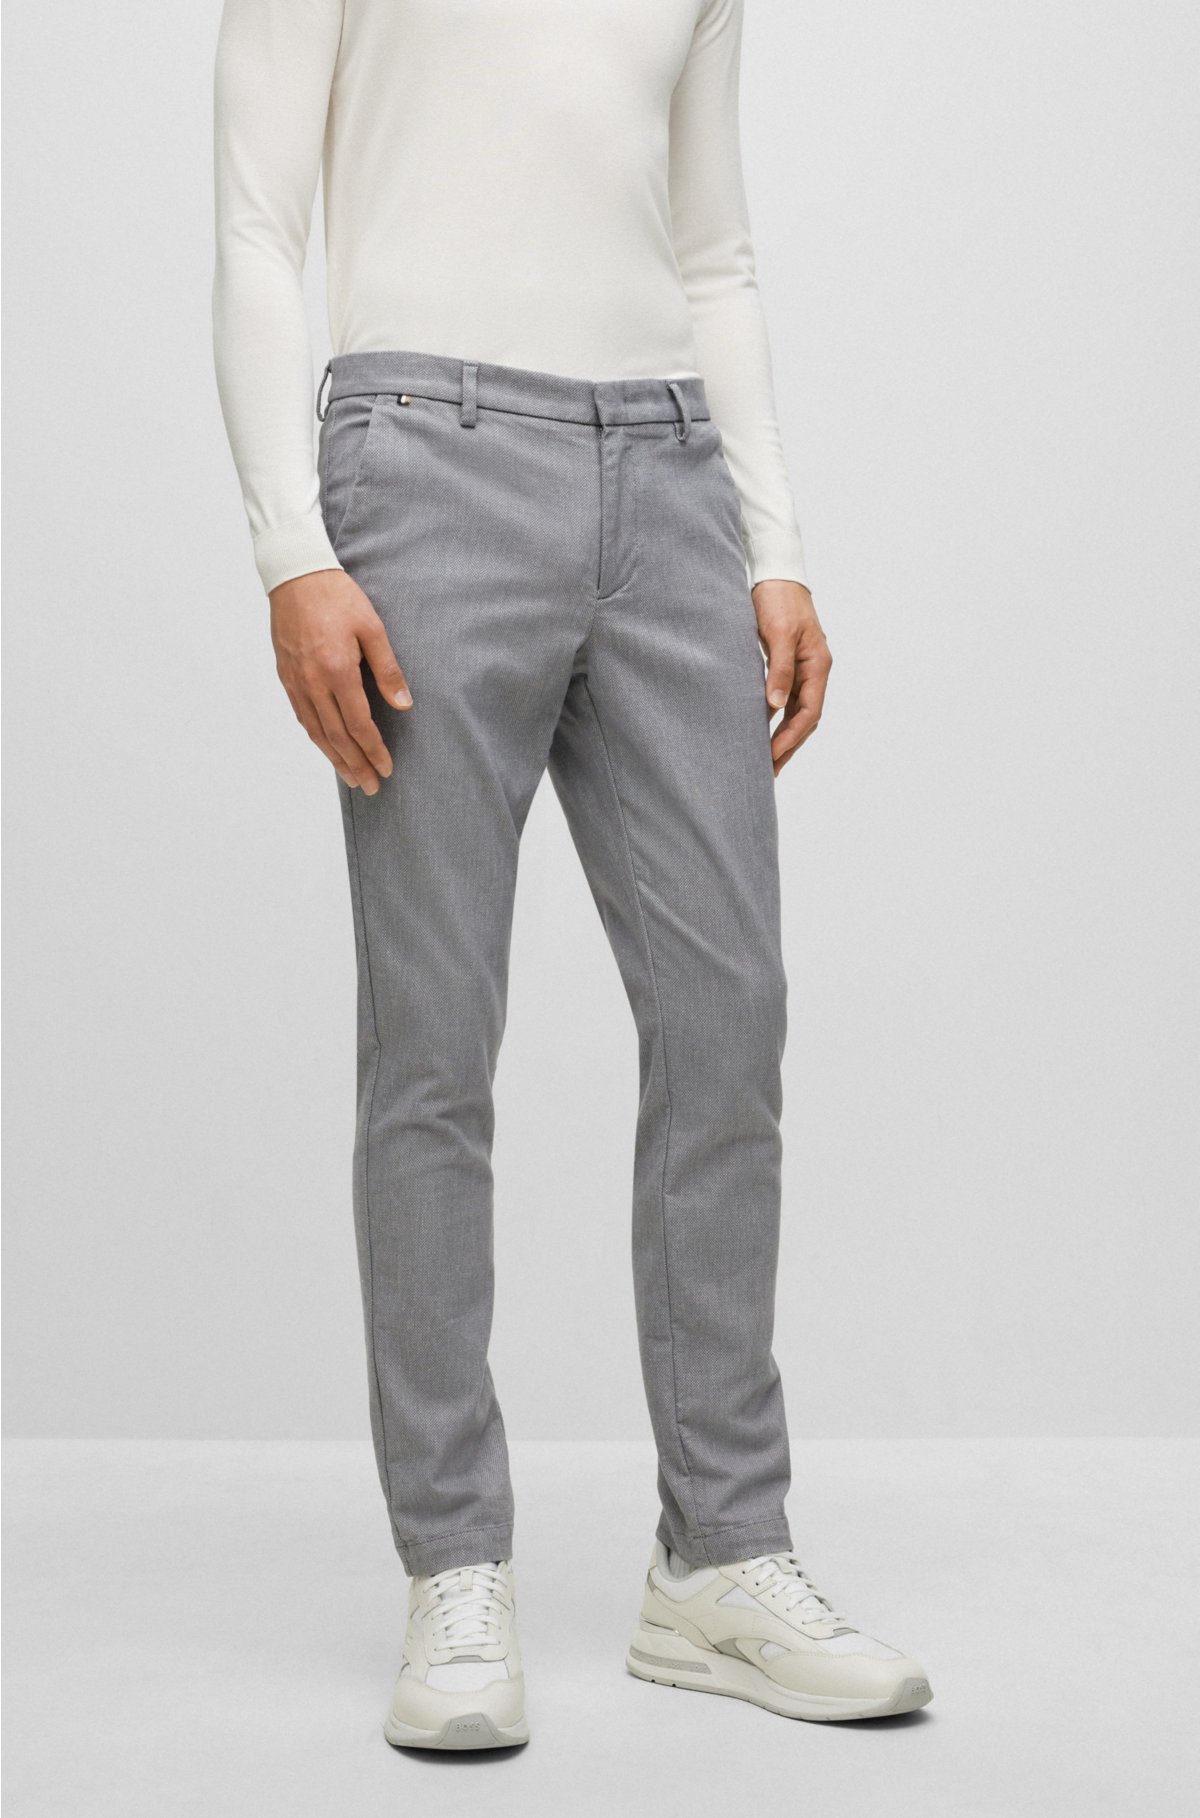 HDE Gray Casual Pants Size XL - 32% off